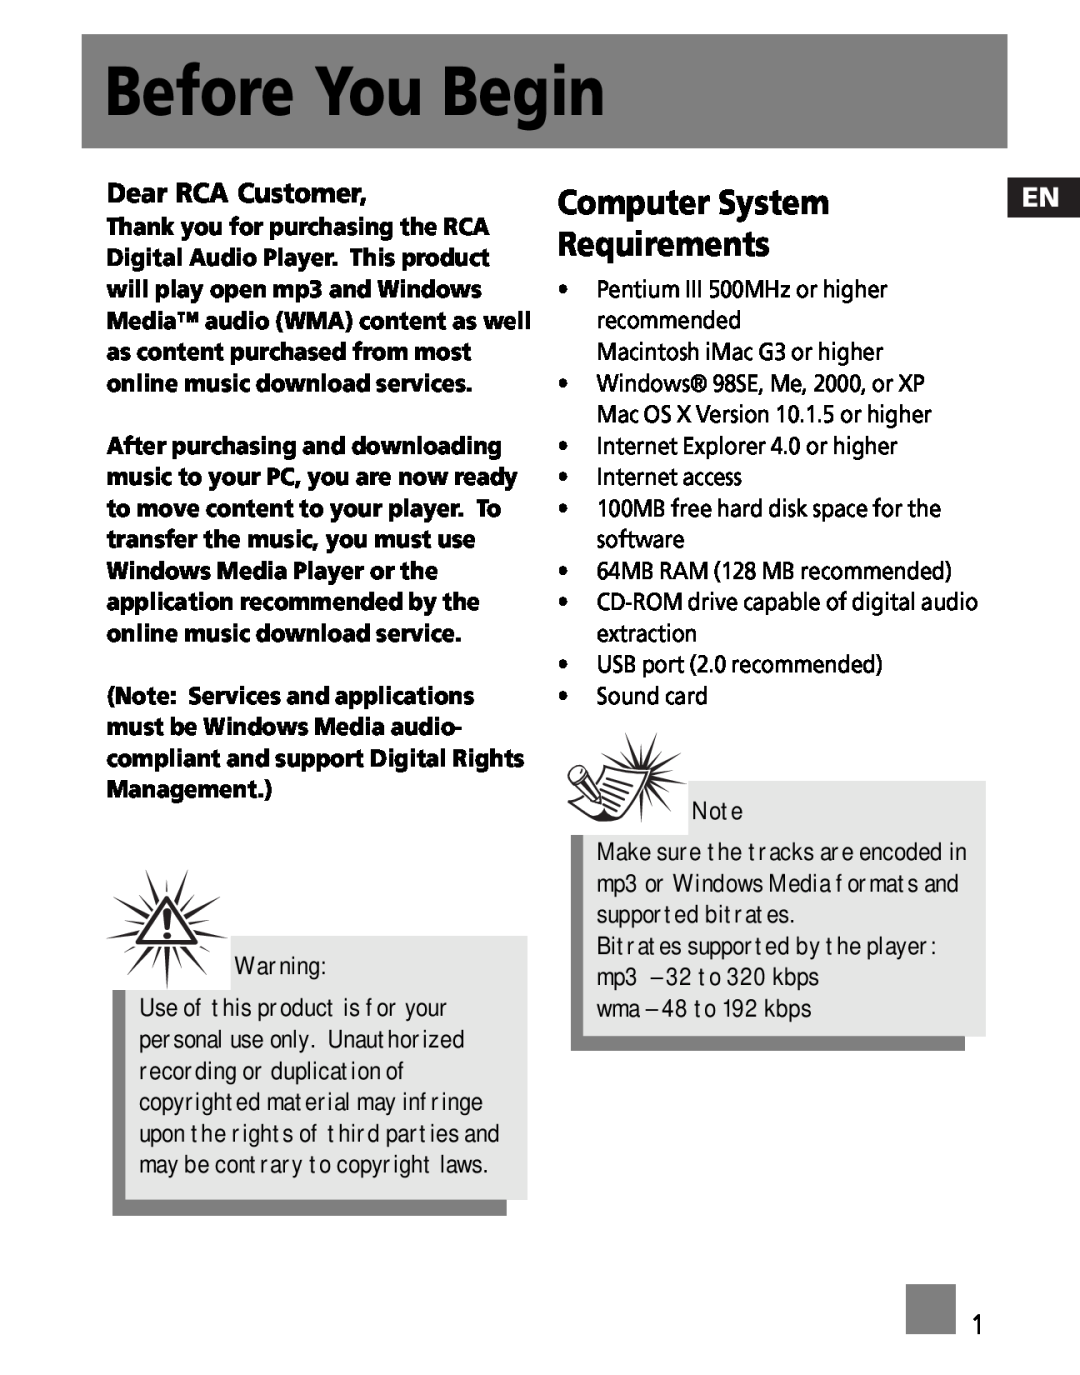 RCA M100256 Computer System, Requirements, Dear RCA Customer, Bitrates supported by the player mp3 - 32 to 320 kbps 